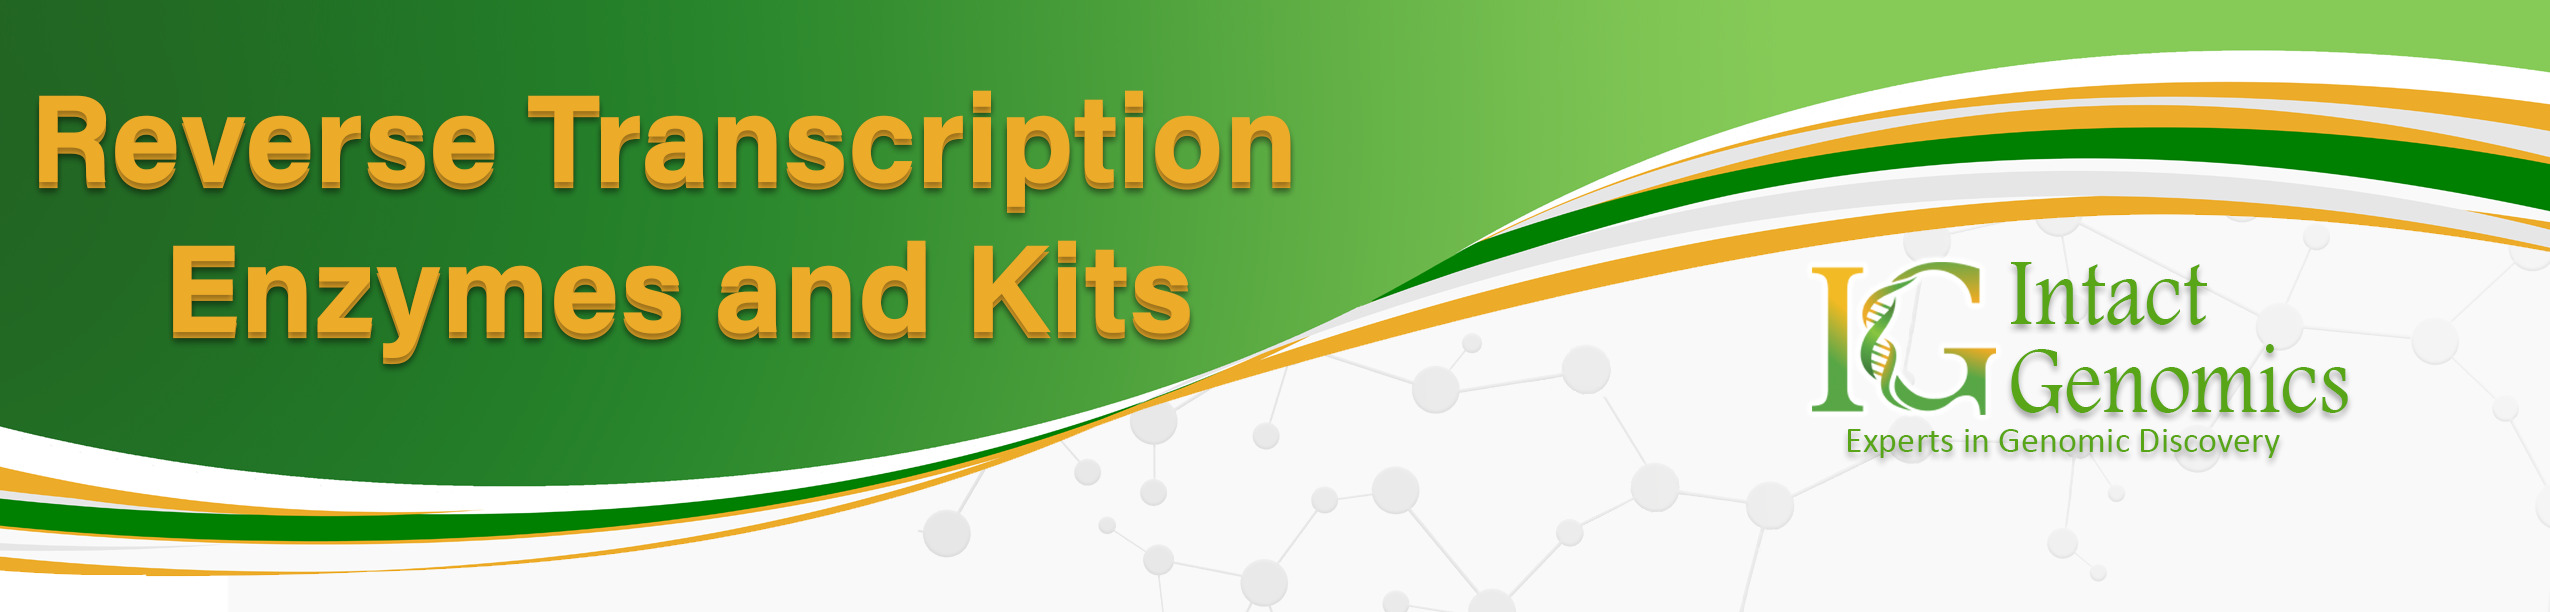 Reverse Transcription Enzymes and kits